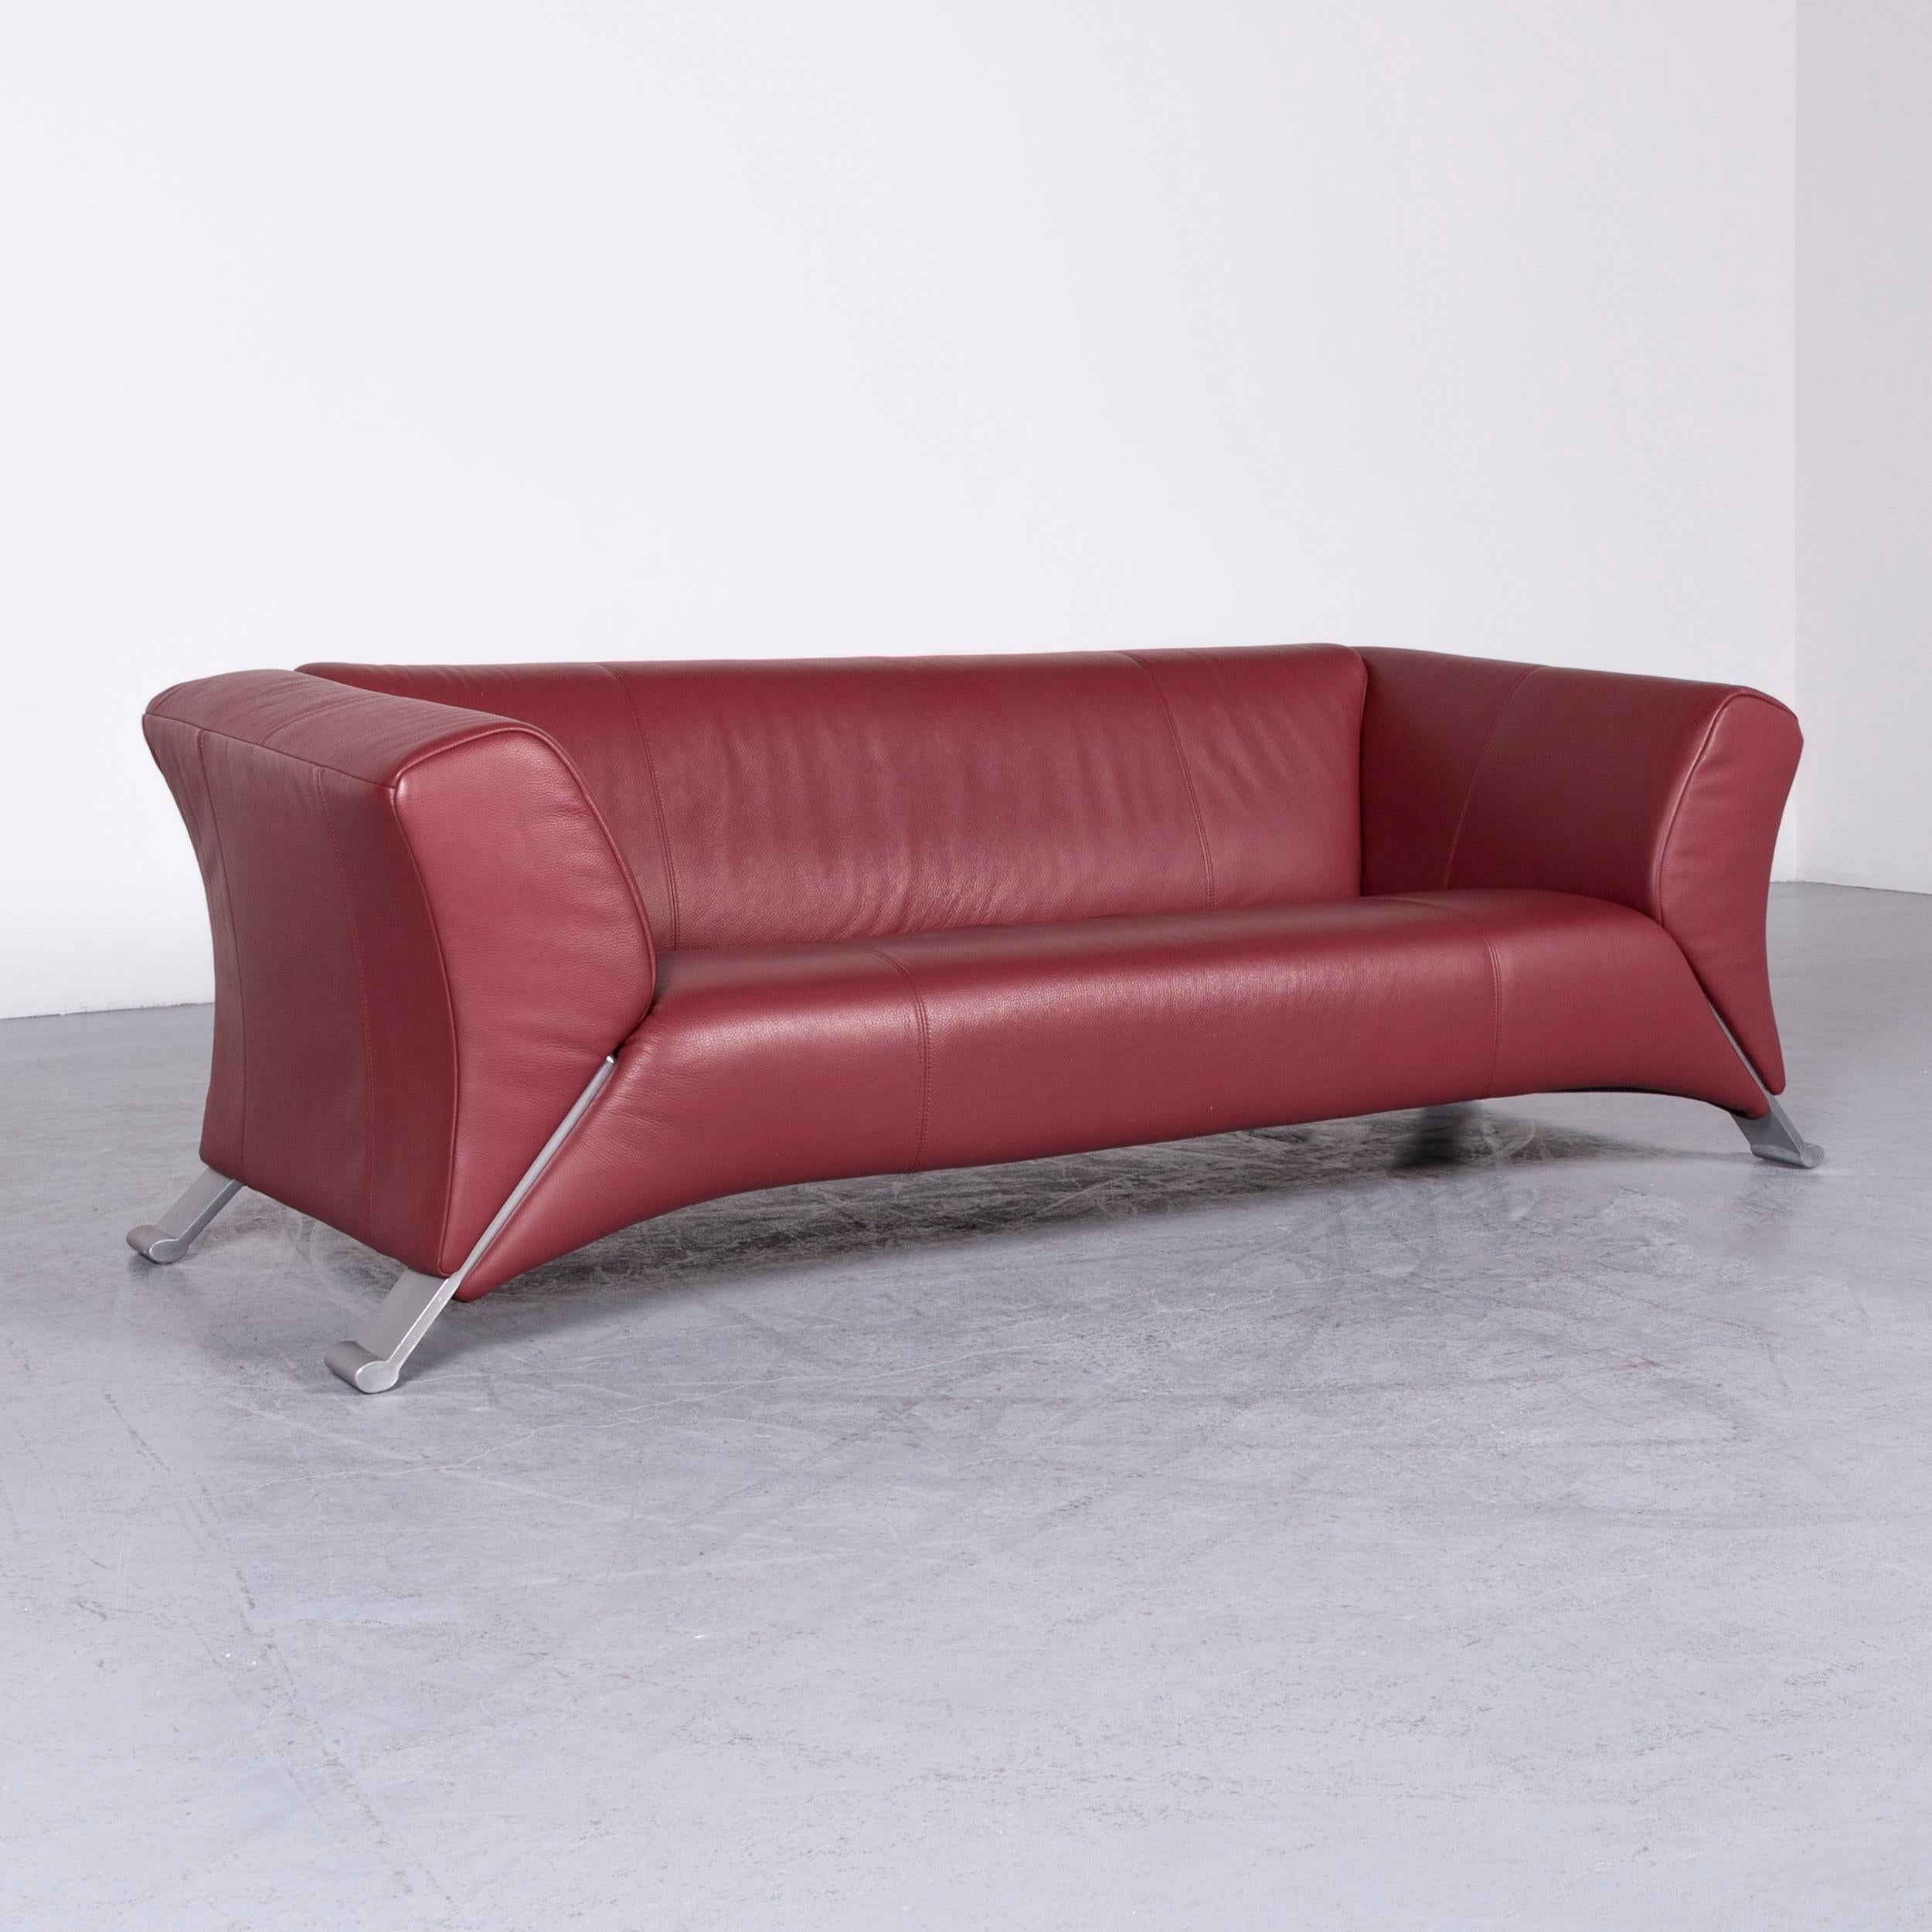 Modern Rolf Benz 322 Designer Sofa Red Three-Seat Leather Couch